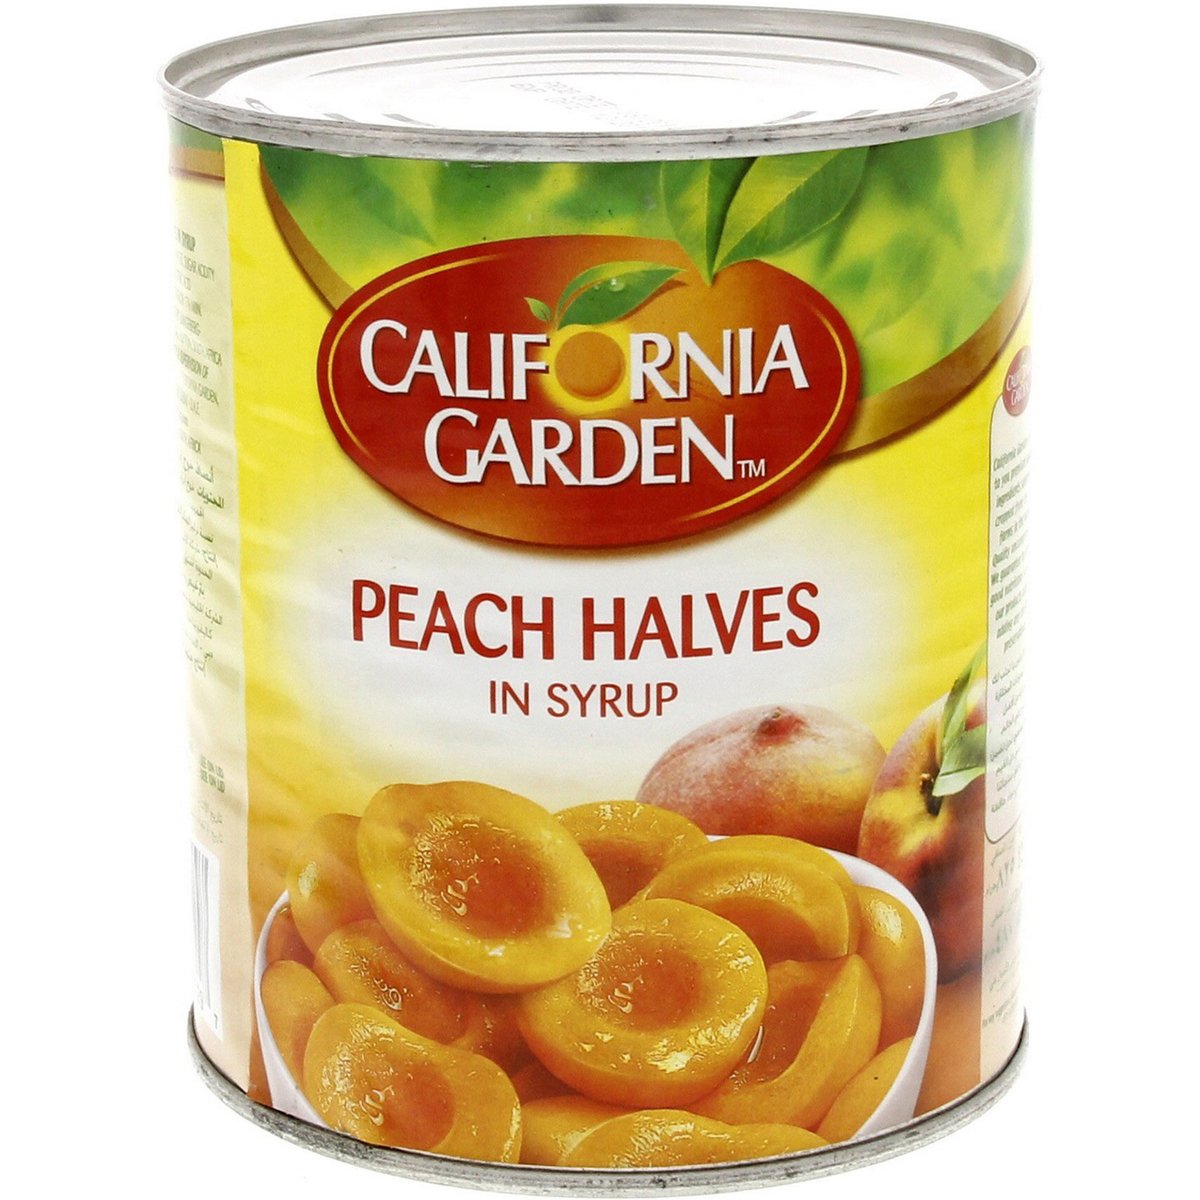 California Garden Canned Peach Halves In Syrup 825g